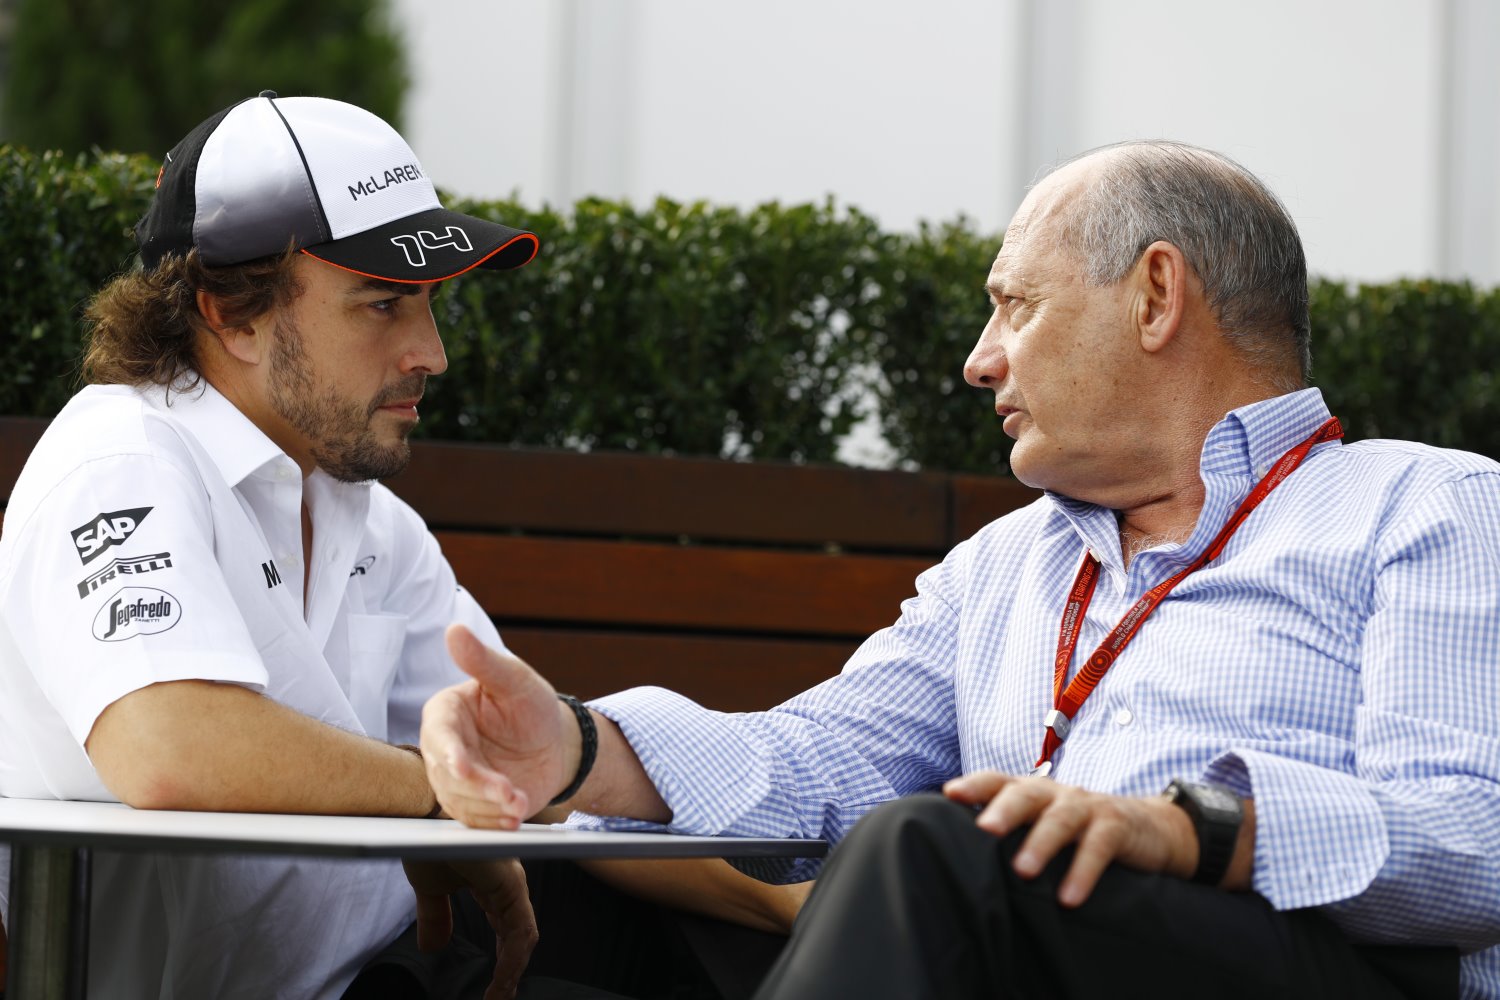 Dennis and Alonso talk